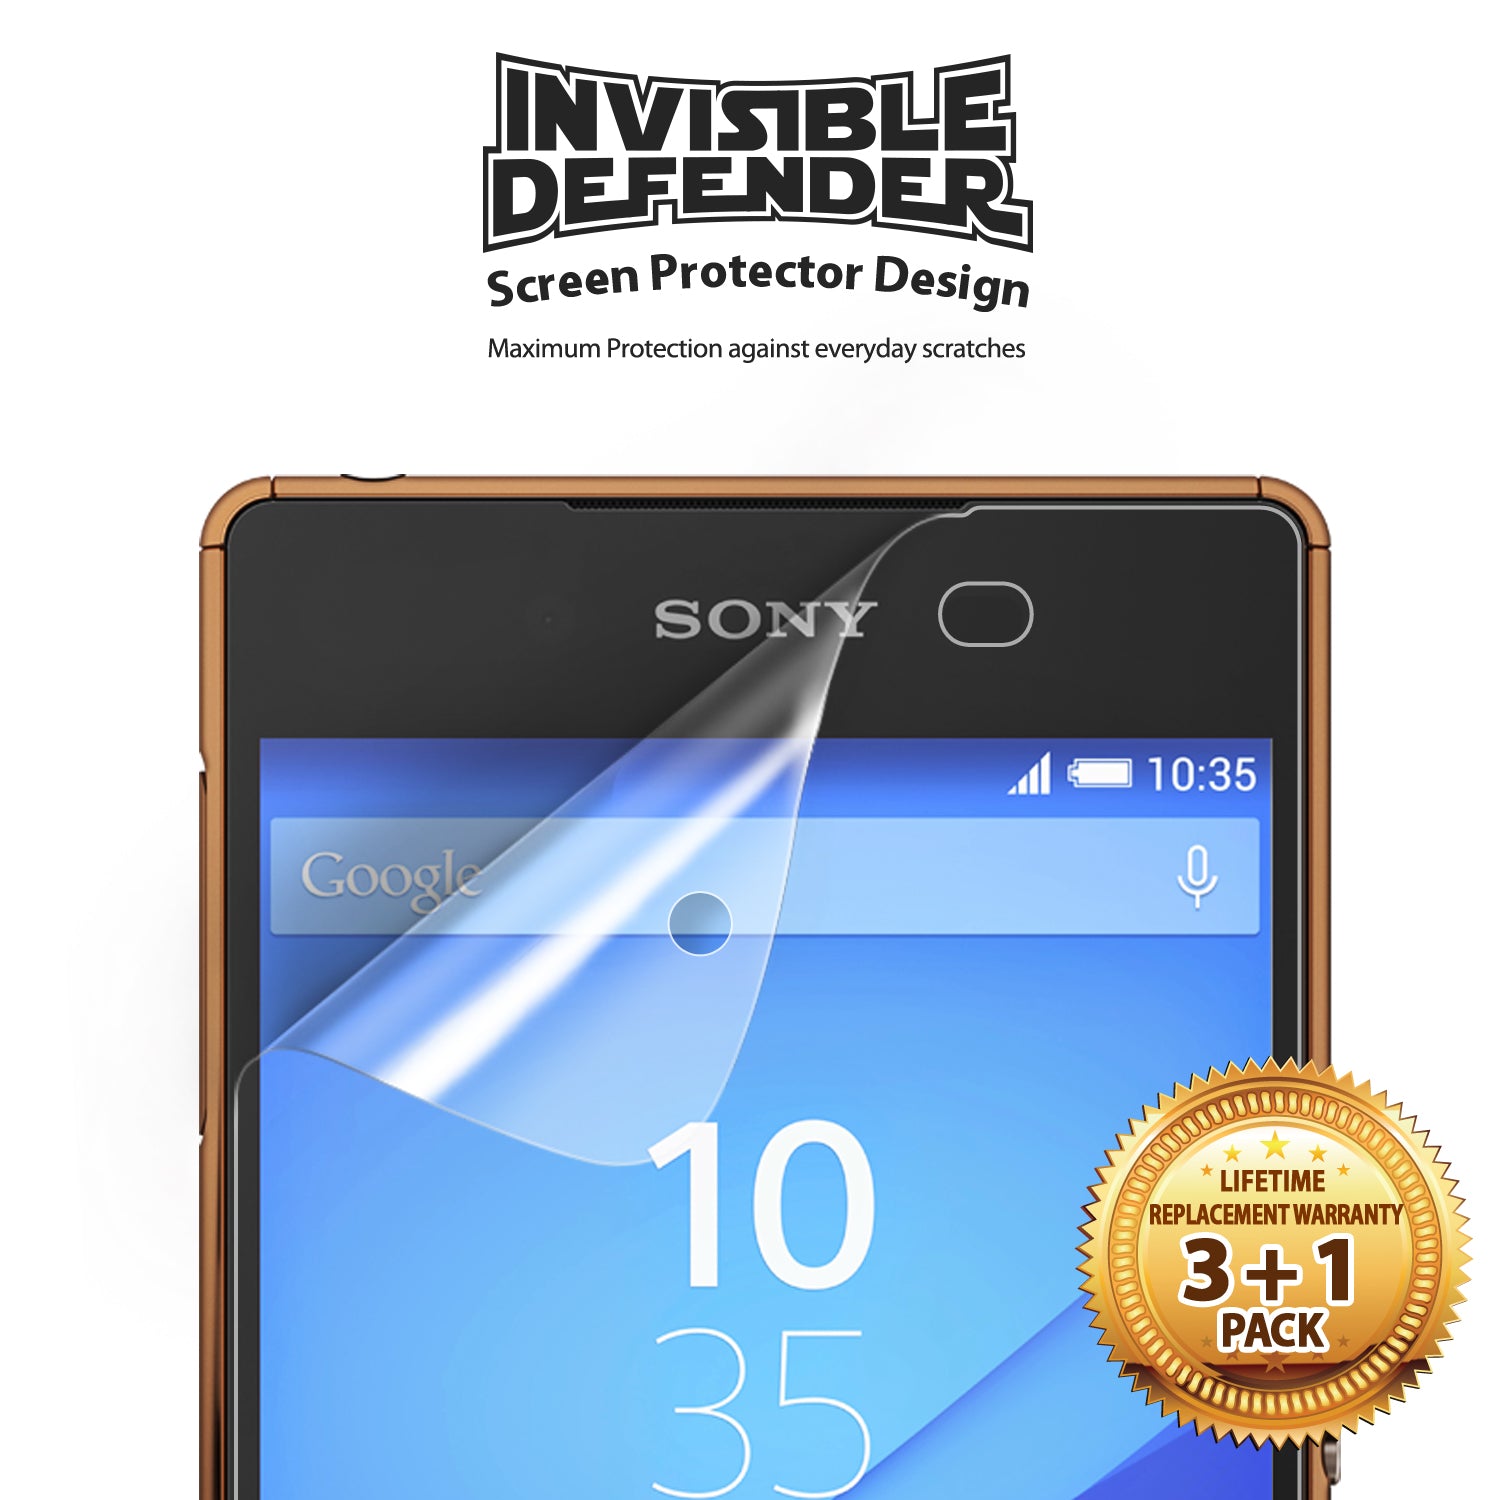 ringke invisible defender screen protector designed for sony xperia z3 / z3 plus